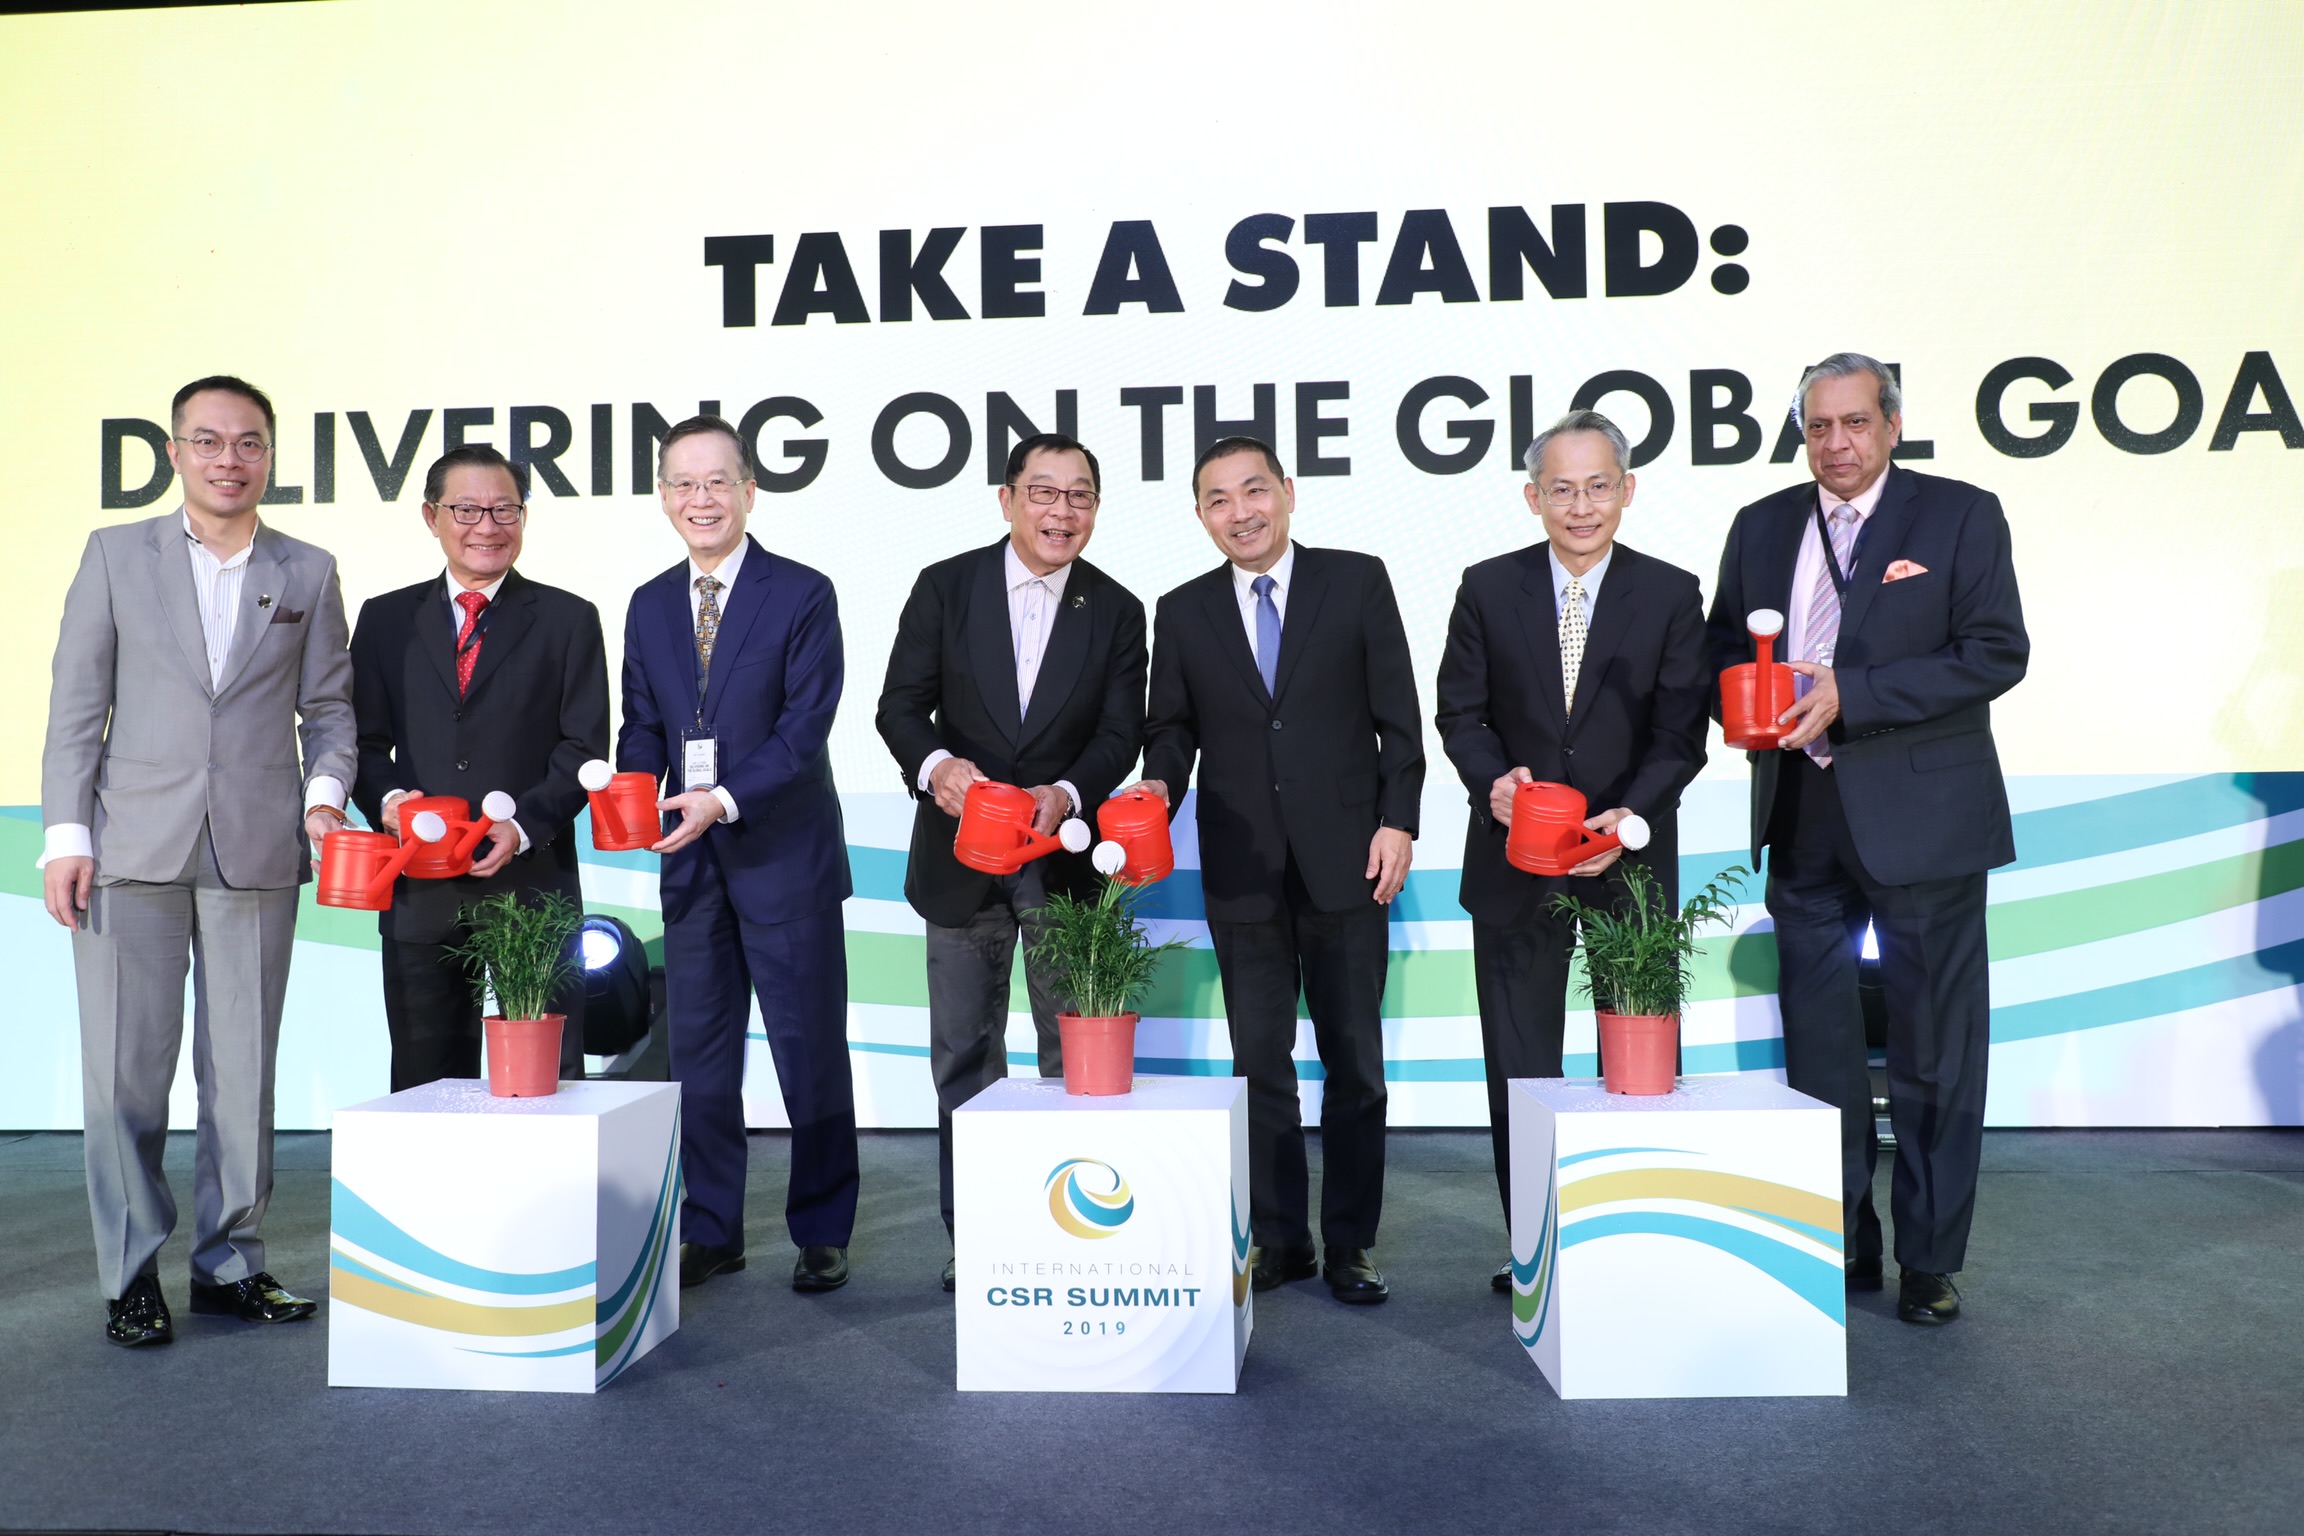 Summit calls on business leaders to take stand on delivering global goals